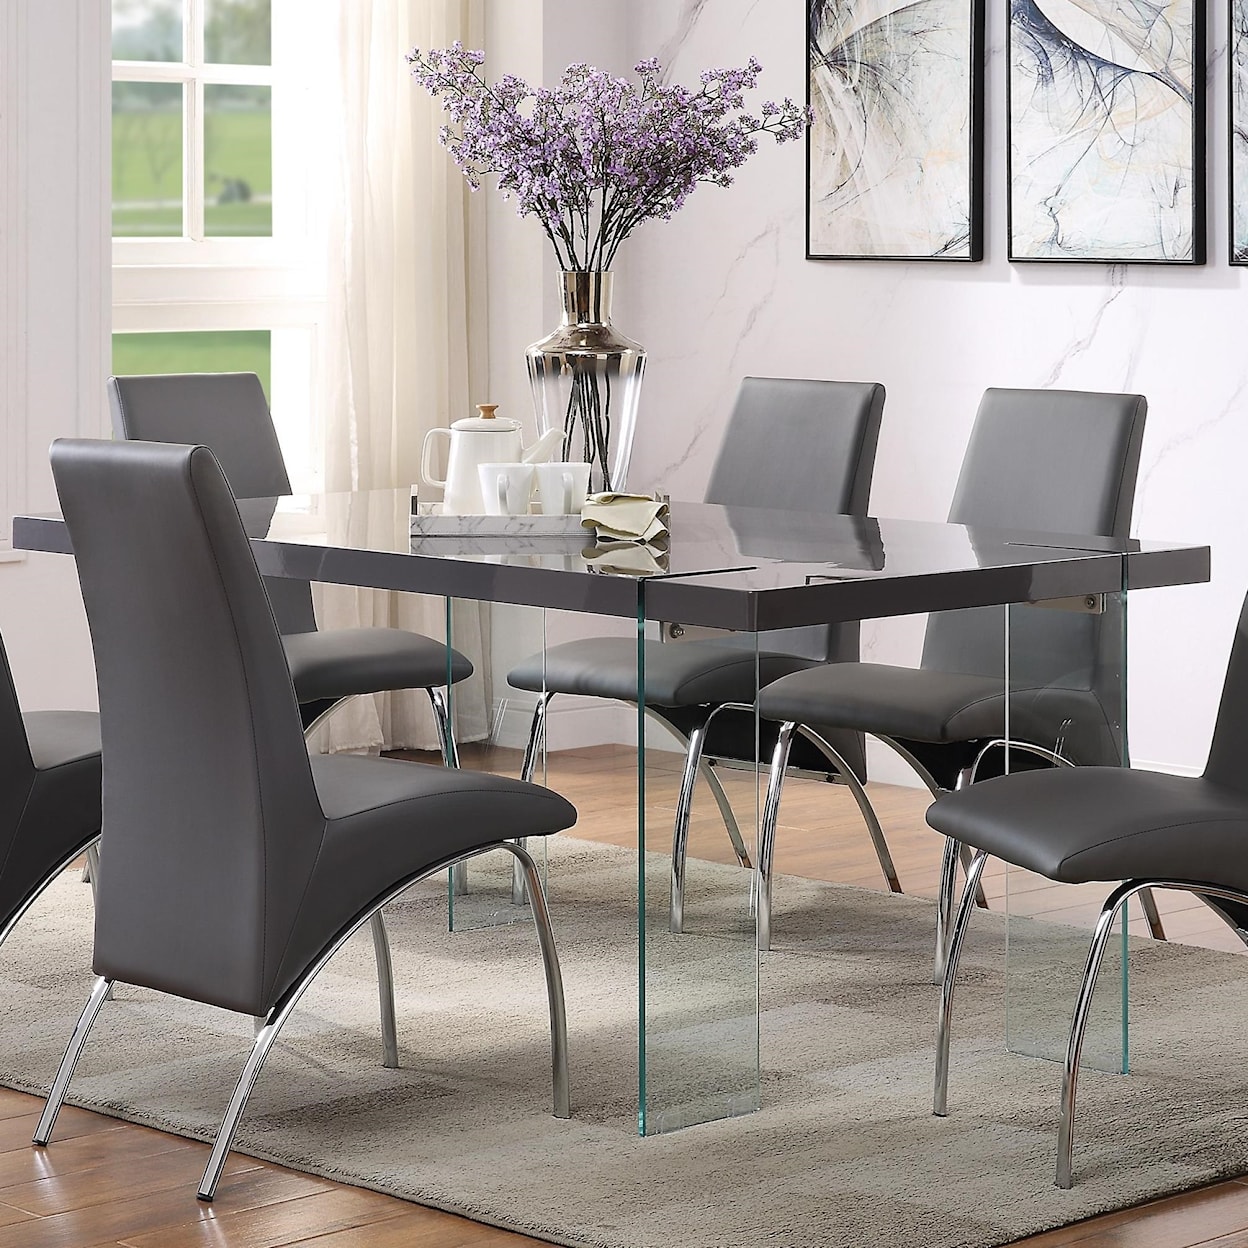 Acme Furniture Noland Dining Table